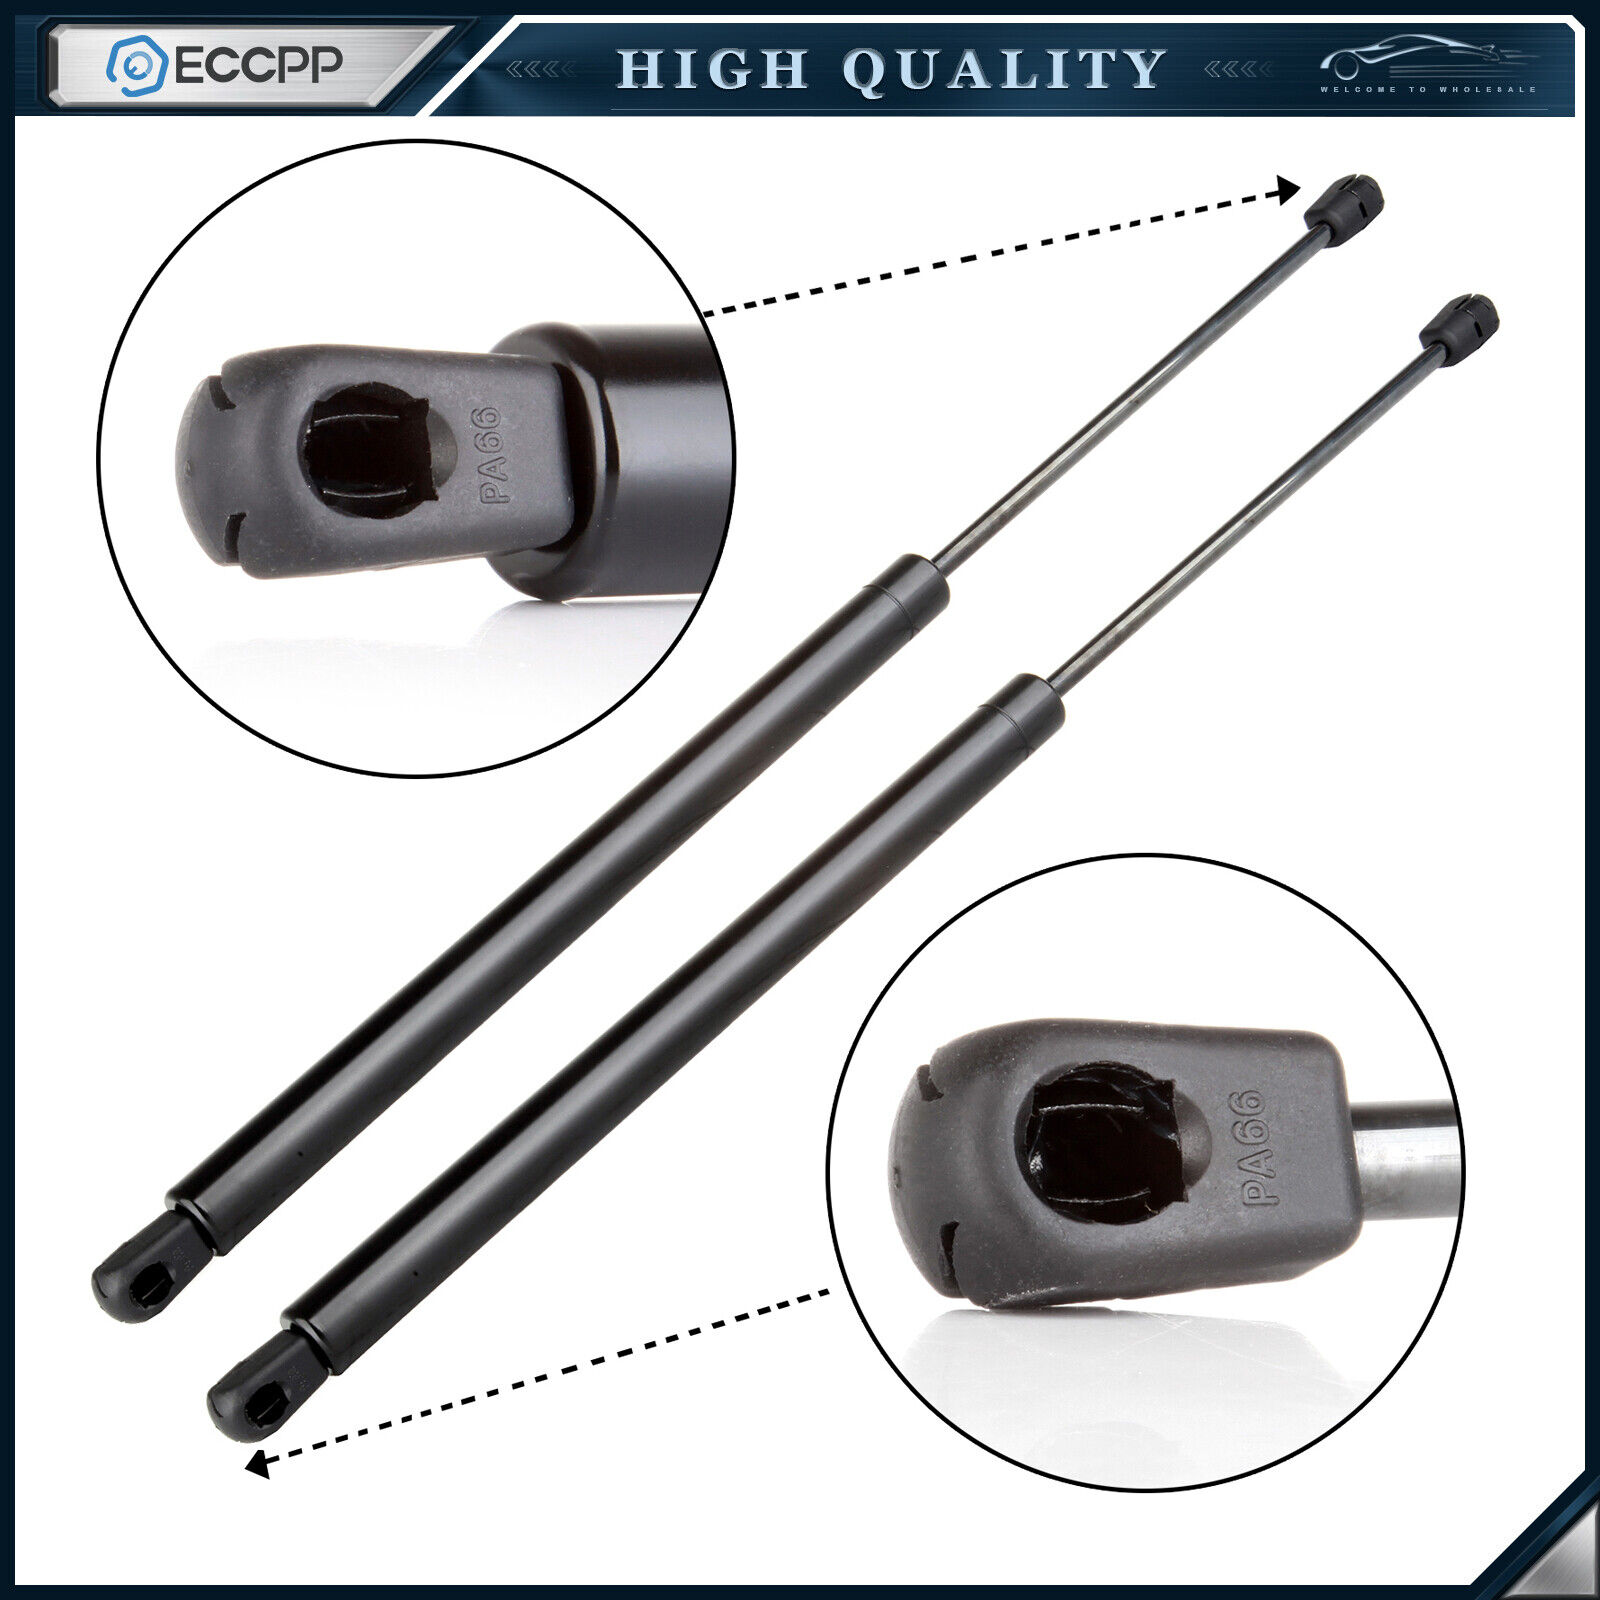 ECCPP 2x Liftgate Gas Hatch Lift Supports Struts Shocks For GMC Acadia 2007-2015